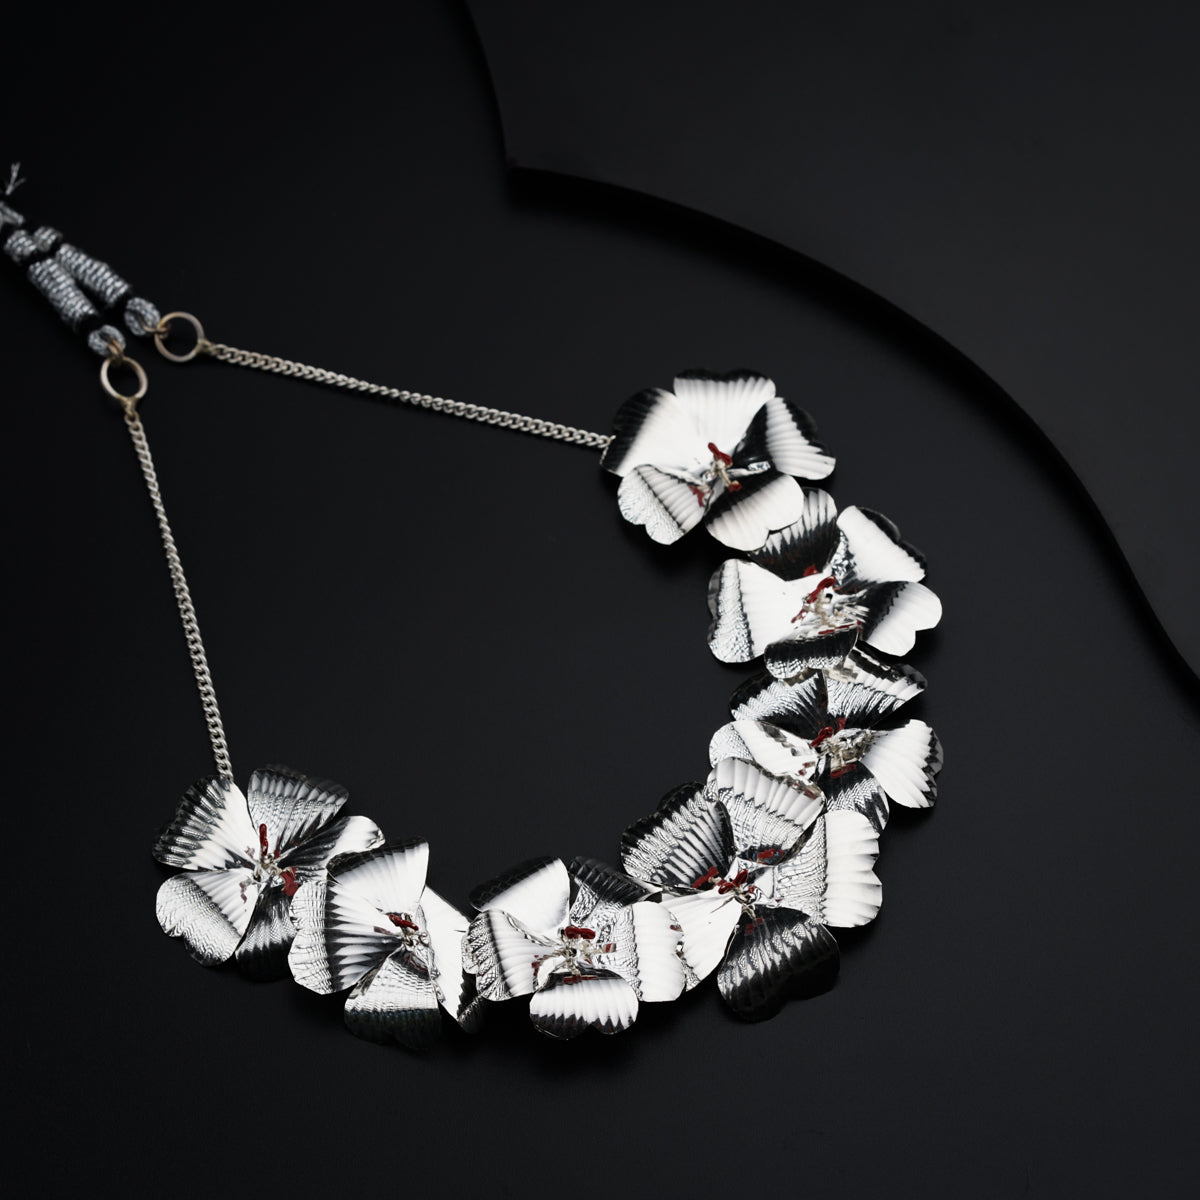 a necklace with white flowers on a black background